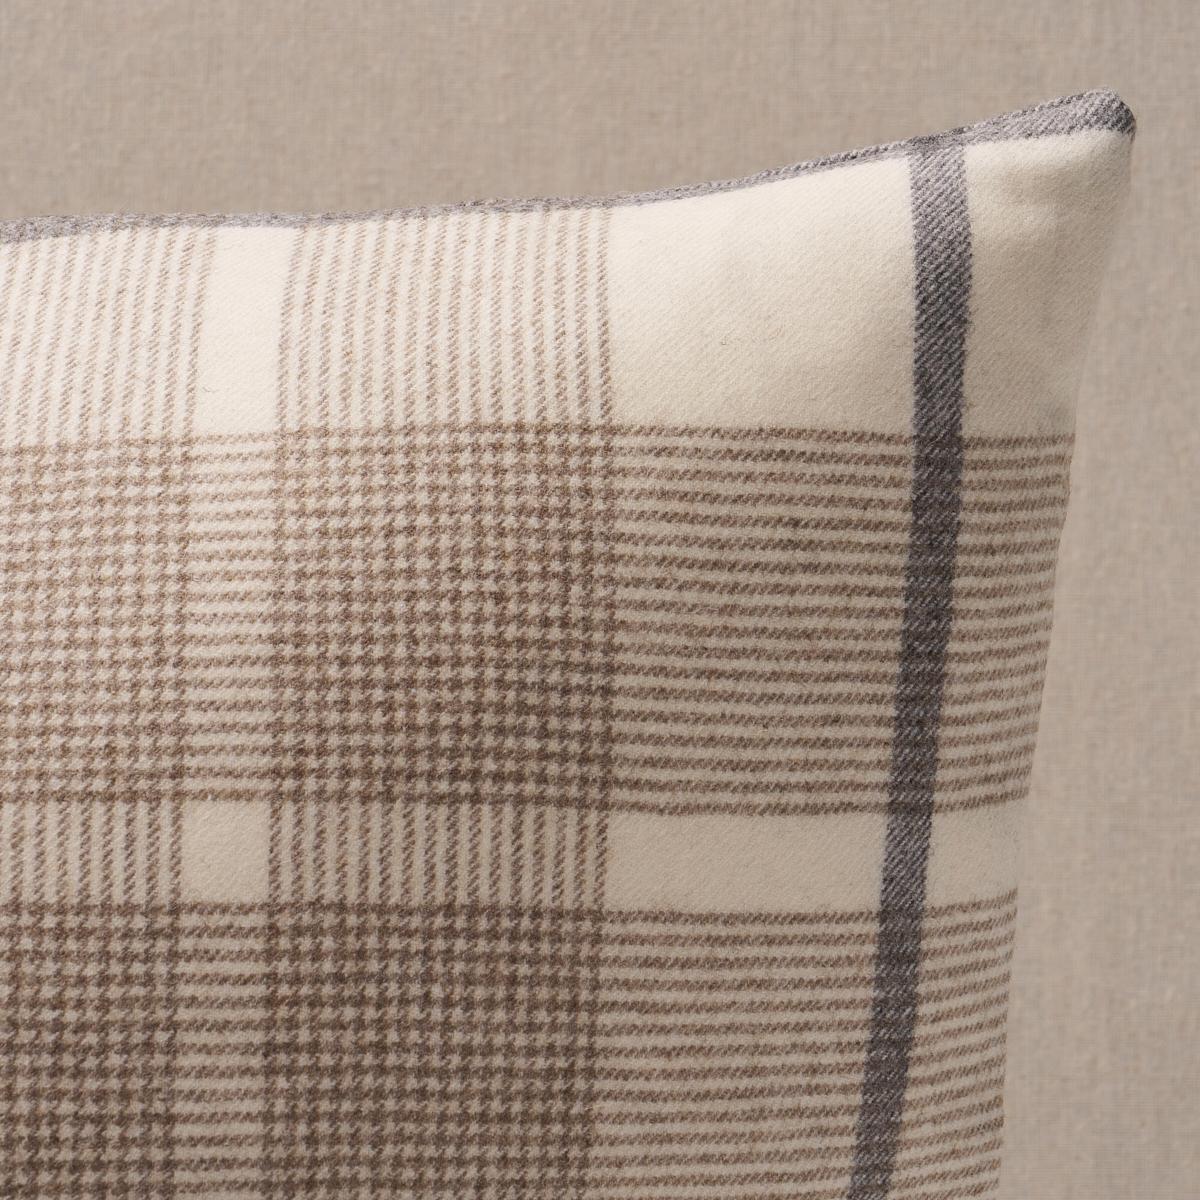 This pillow features Montana Wool Plaid with a knife edge finish. Montana Wool Plaid in neutral is a fine, tightly woven houndstooth check with an overstripe that adds lovely depth and a touch of contrast. Pillow includes a feather/down fill insert